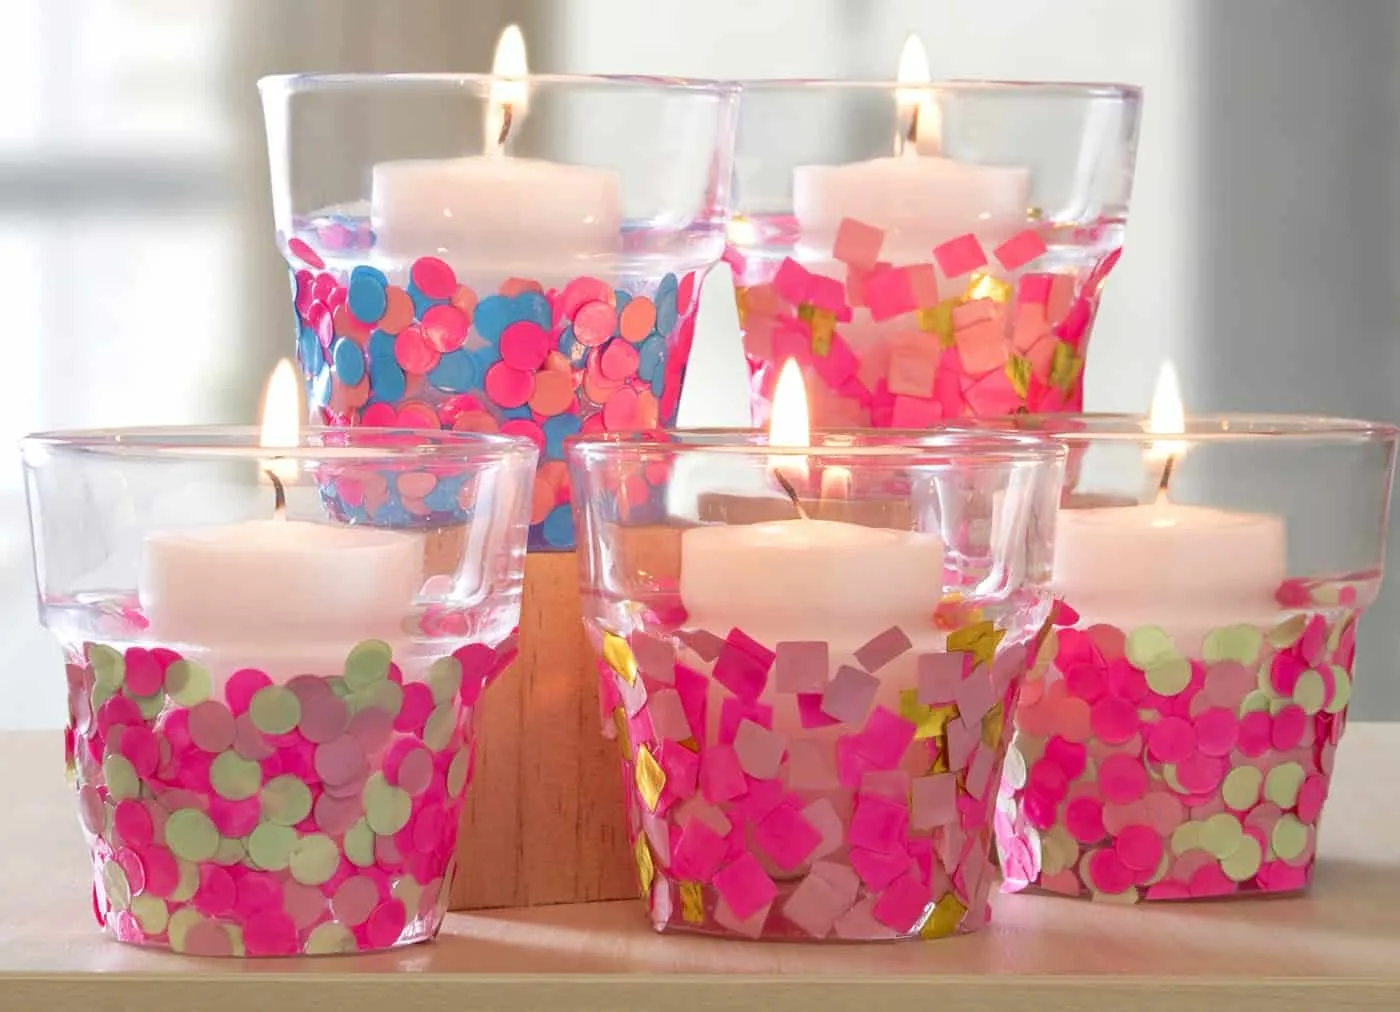 Decorate candle holders with confetti and Mod Podge